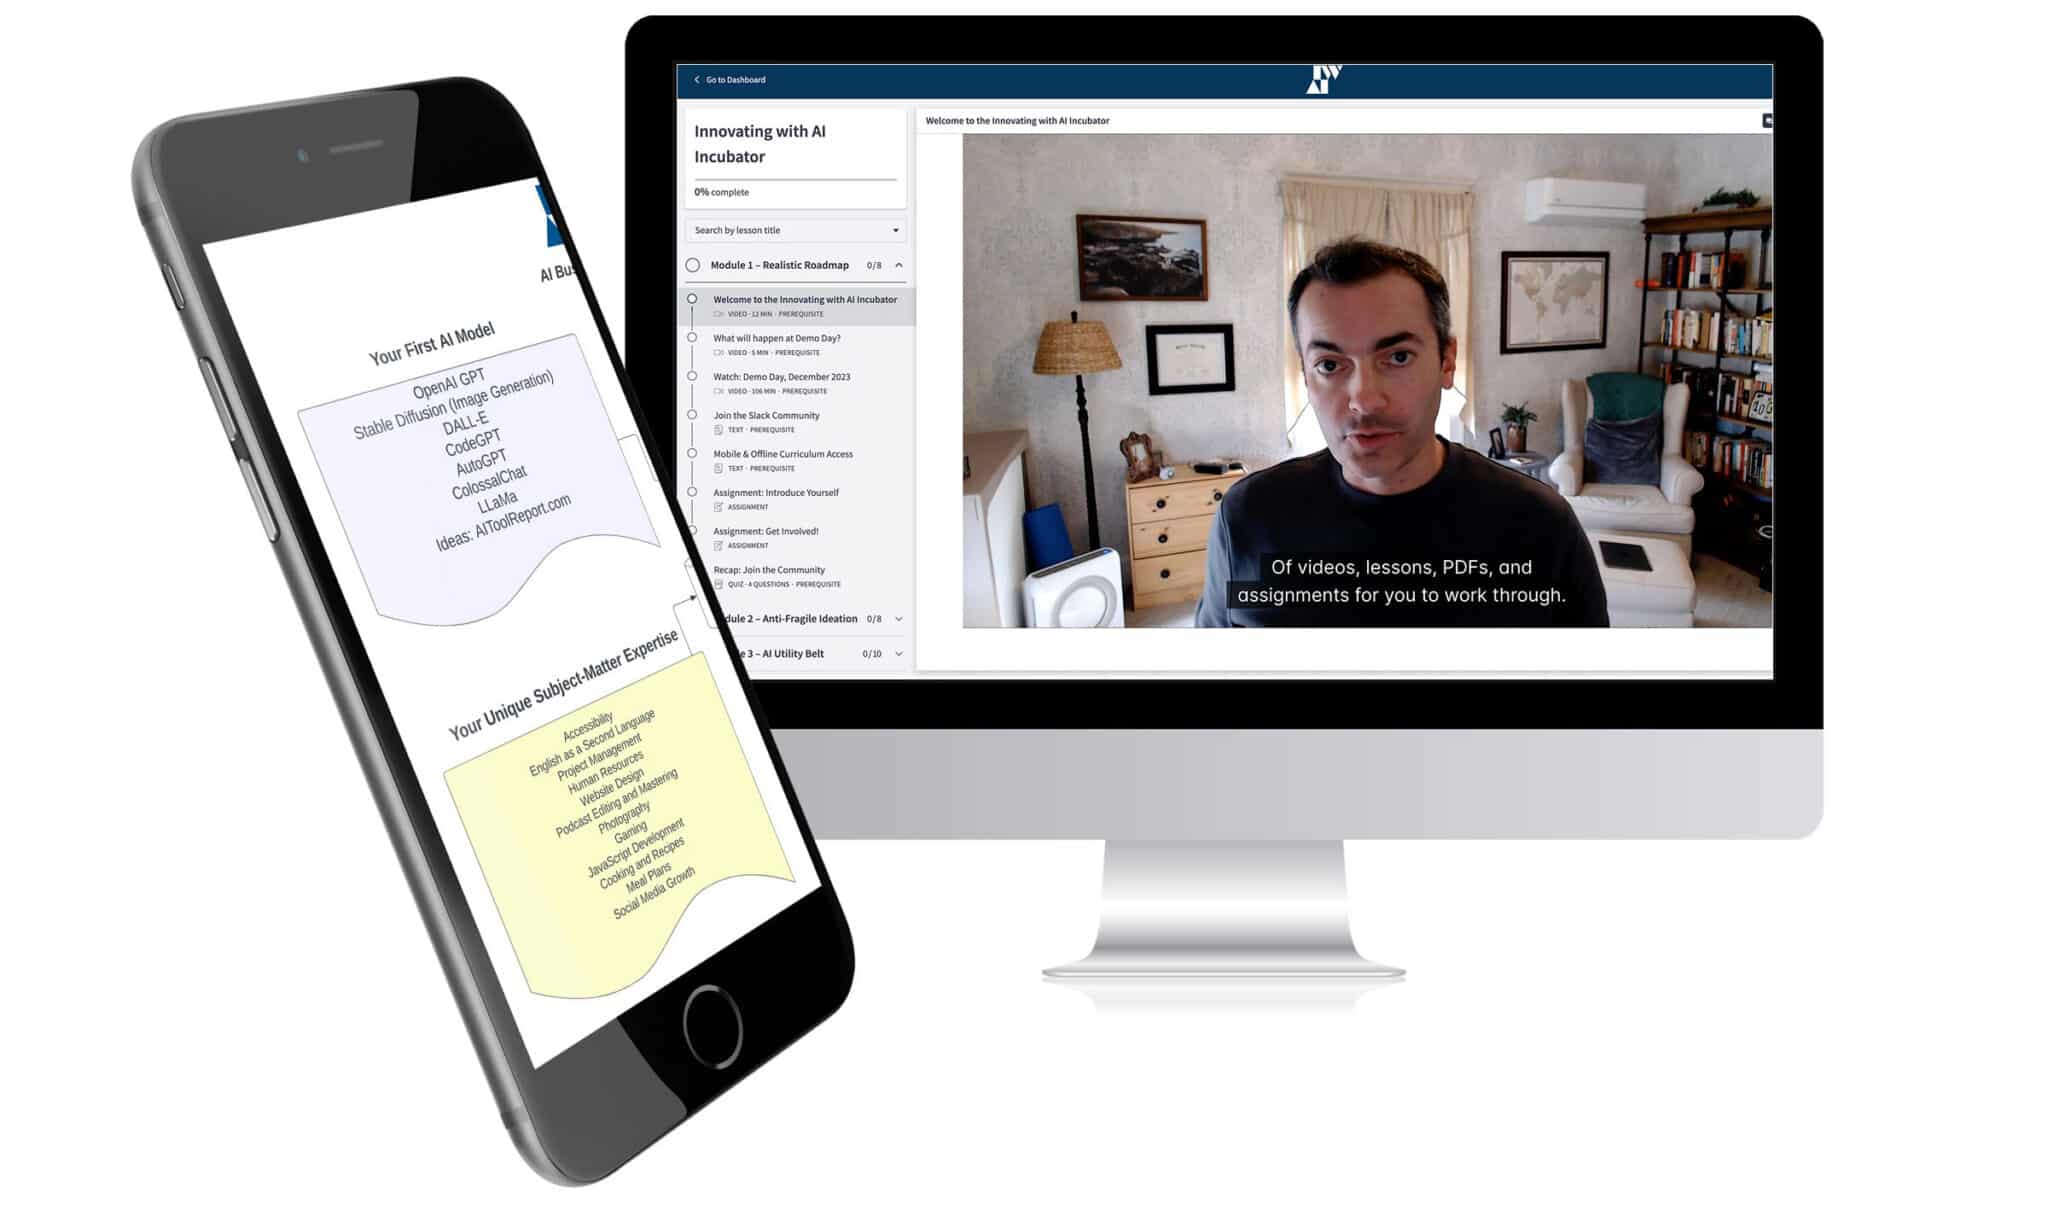 The image shows a smartphone with notes on AI models and a desktop computer with a video tutorial on innovating with AI, including a person speaking.